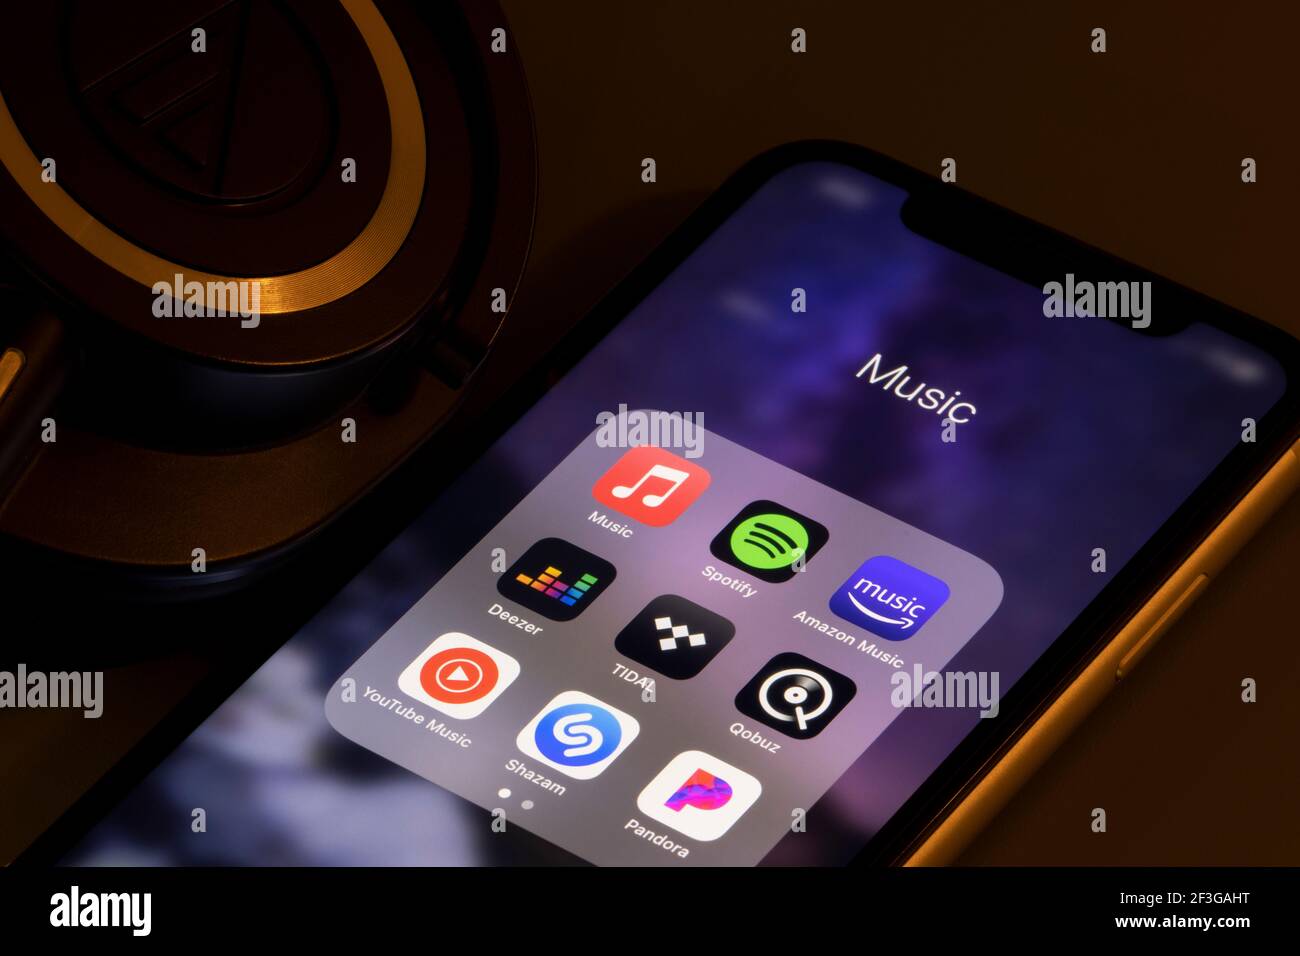 Assorted music apps - Apple Music, Spotify, Amazon Music, Deezer, TIDAL, Qobuz, YouTube Music, Shazam, and Pandora - are seen on an iPhone. Stock Photo